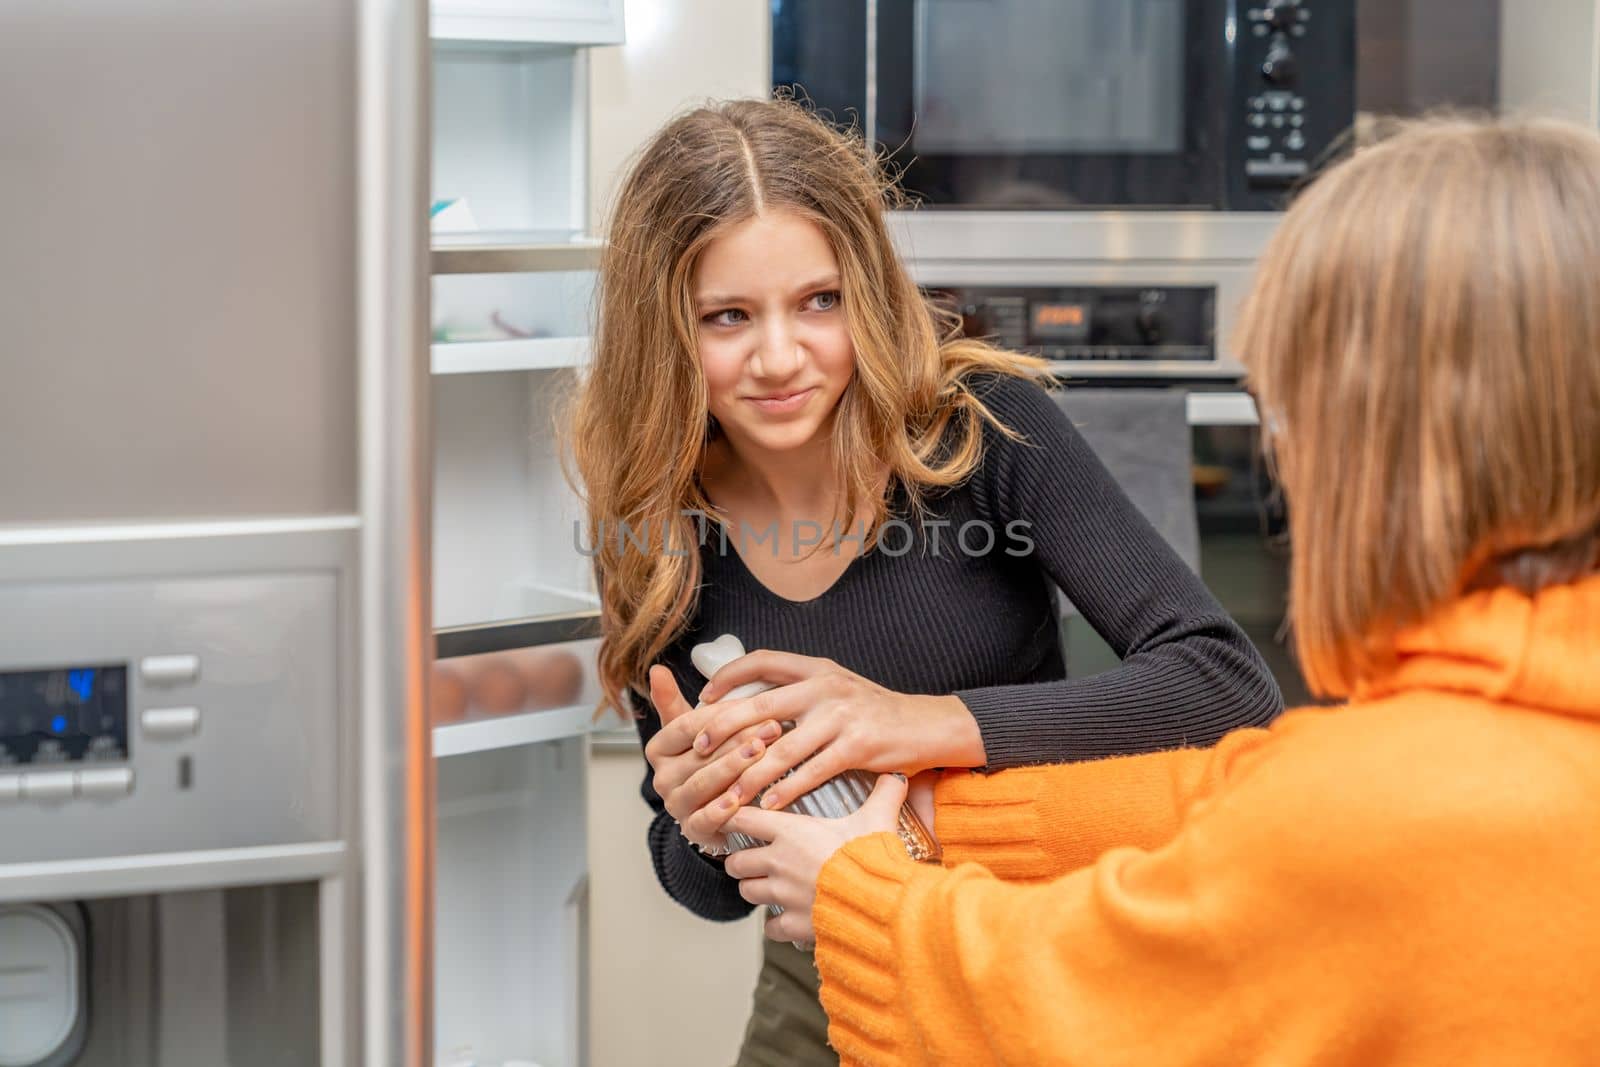 the children are fighting over the sweets in the fridge by Edophoto